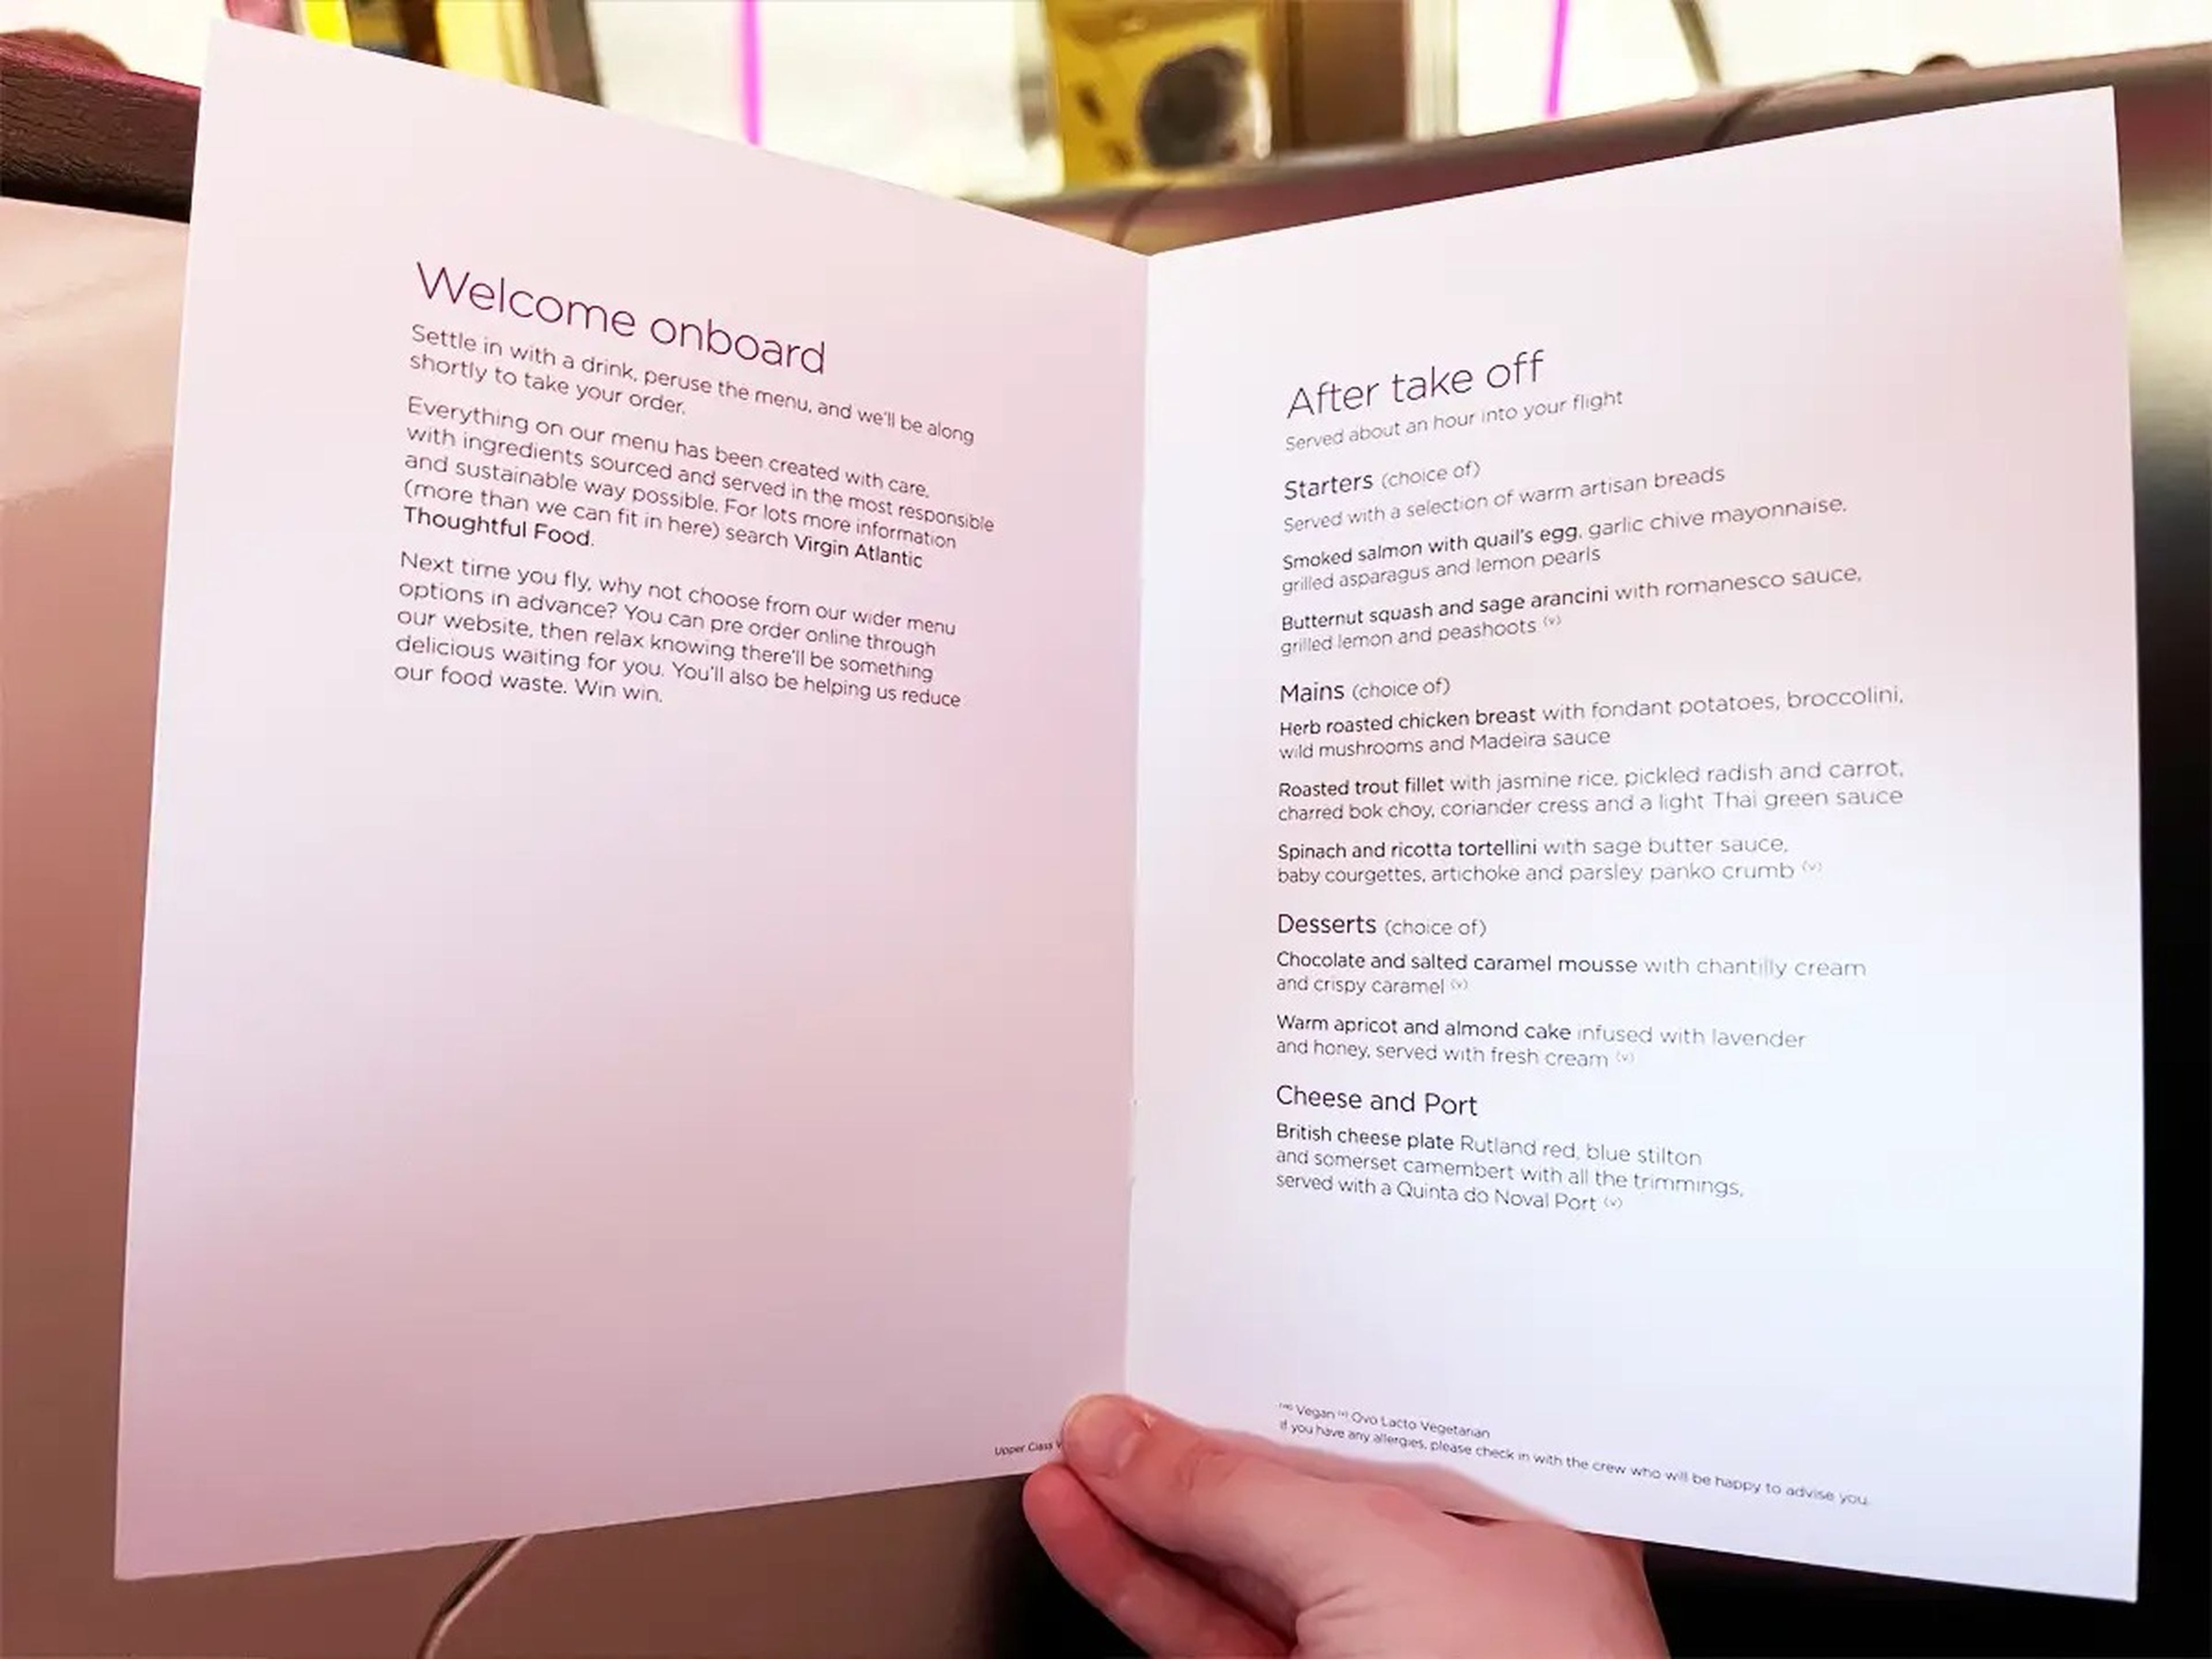 A hand holds a white paper menu with a "welcome onboard message" and a menu under a "after take off" section. The menu includes starters, mains, desserts, and cheese and port